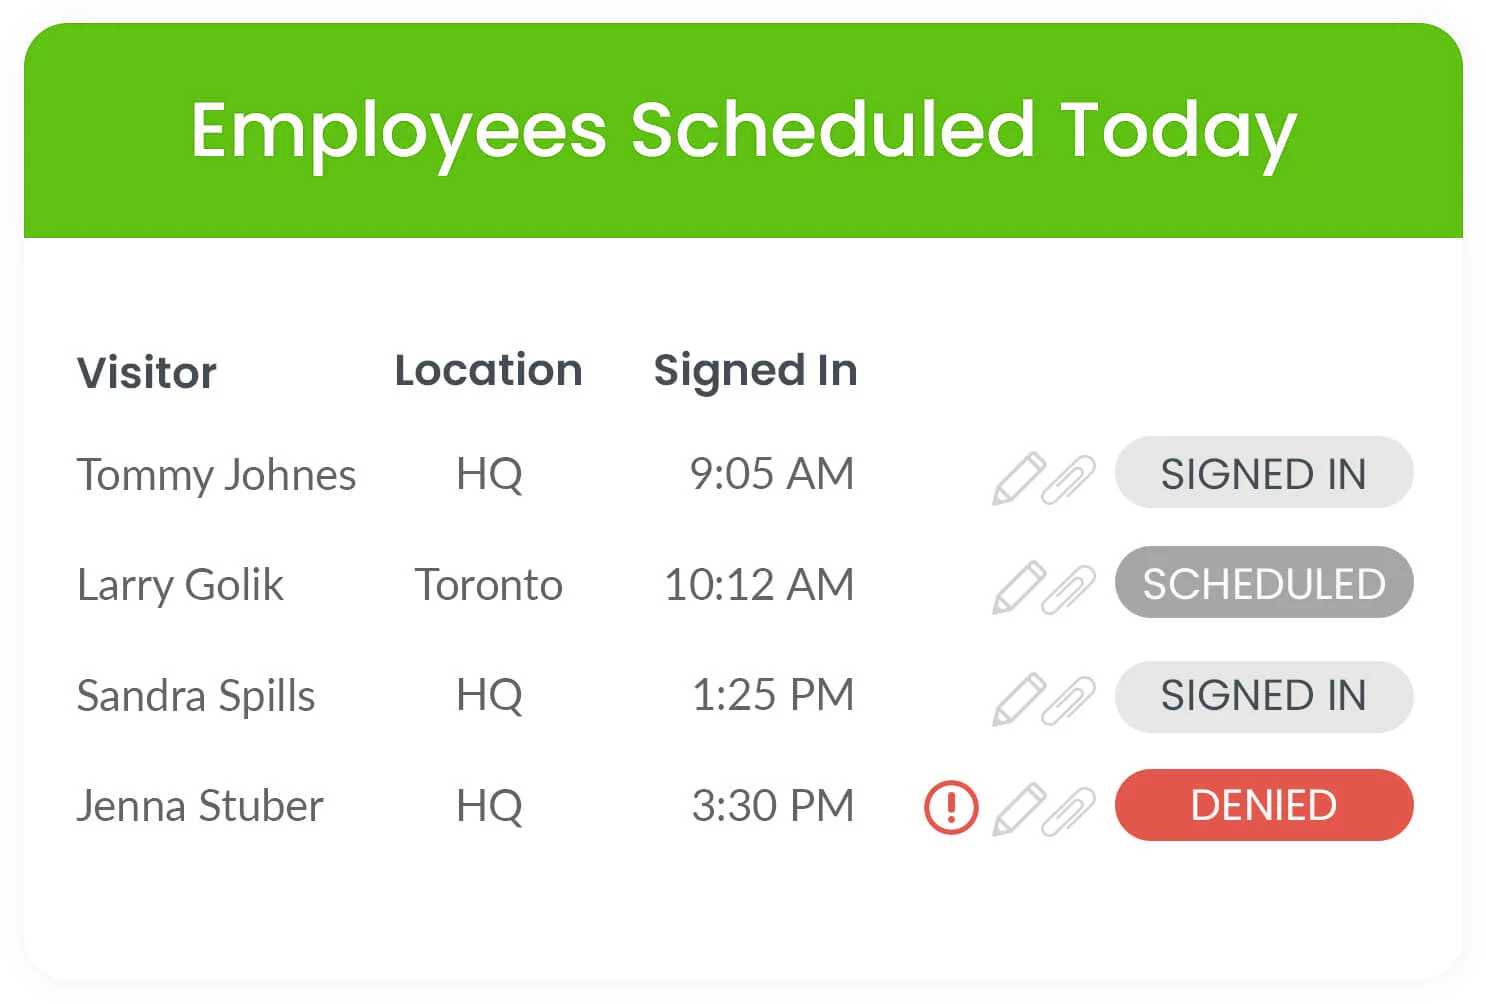 Employee-Scheduled-Today@2x